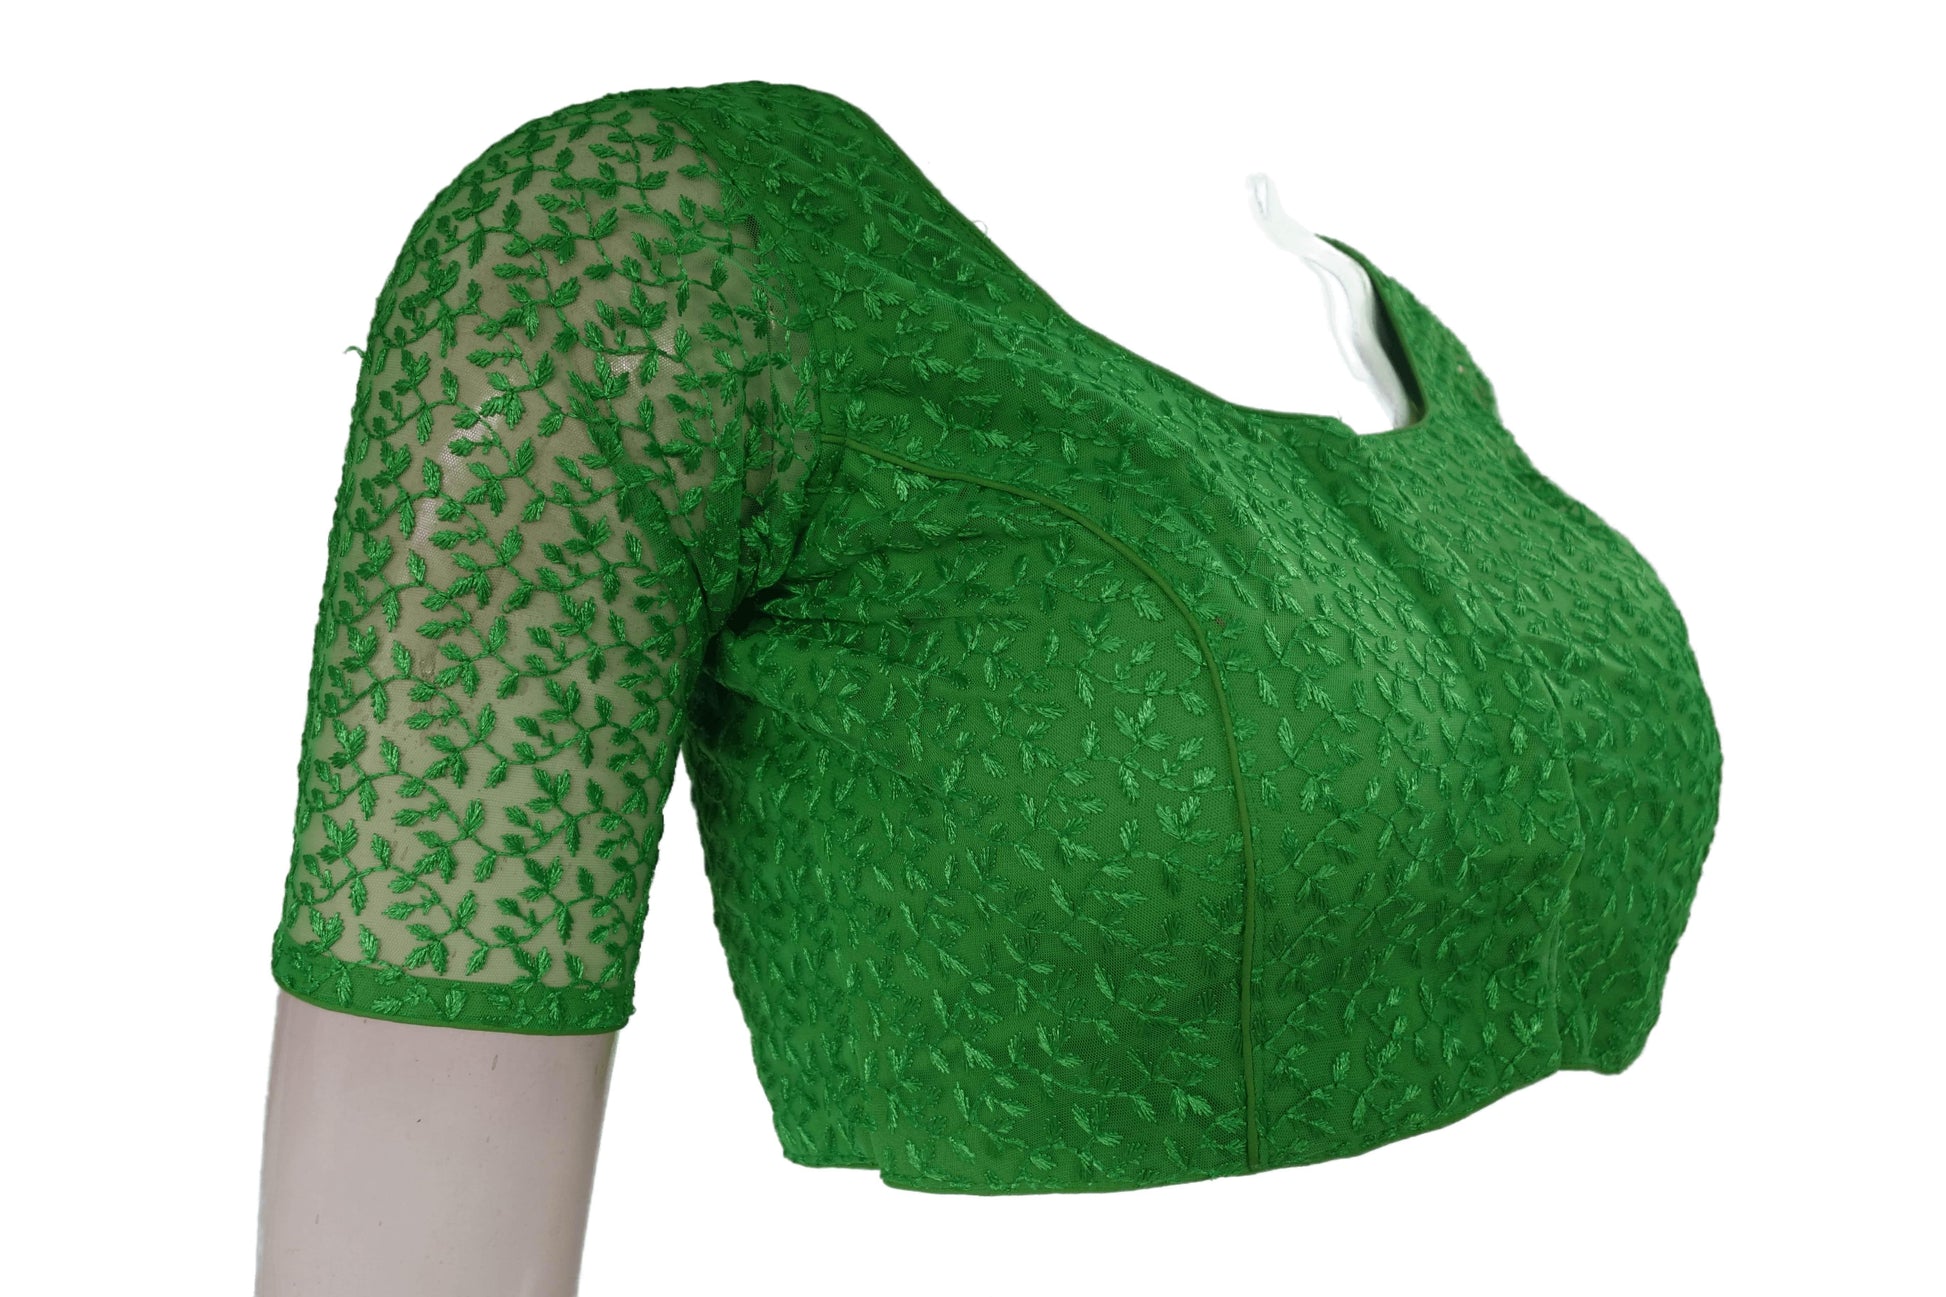 Green Color Netted Fancy Designer Readymade Saree Blouse, Matching Blouse for sarees - D3blouses